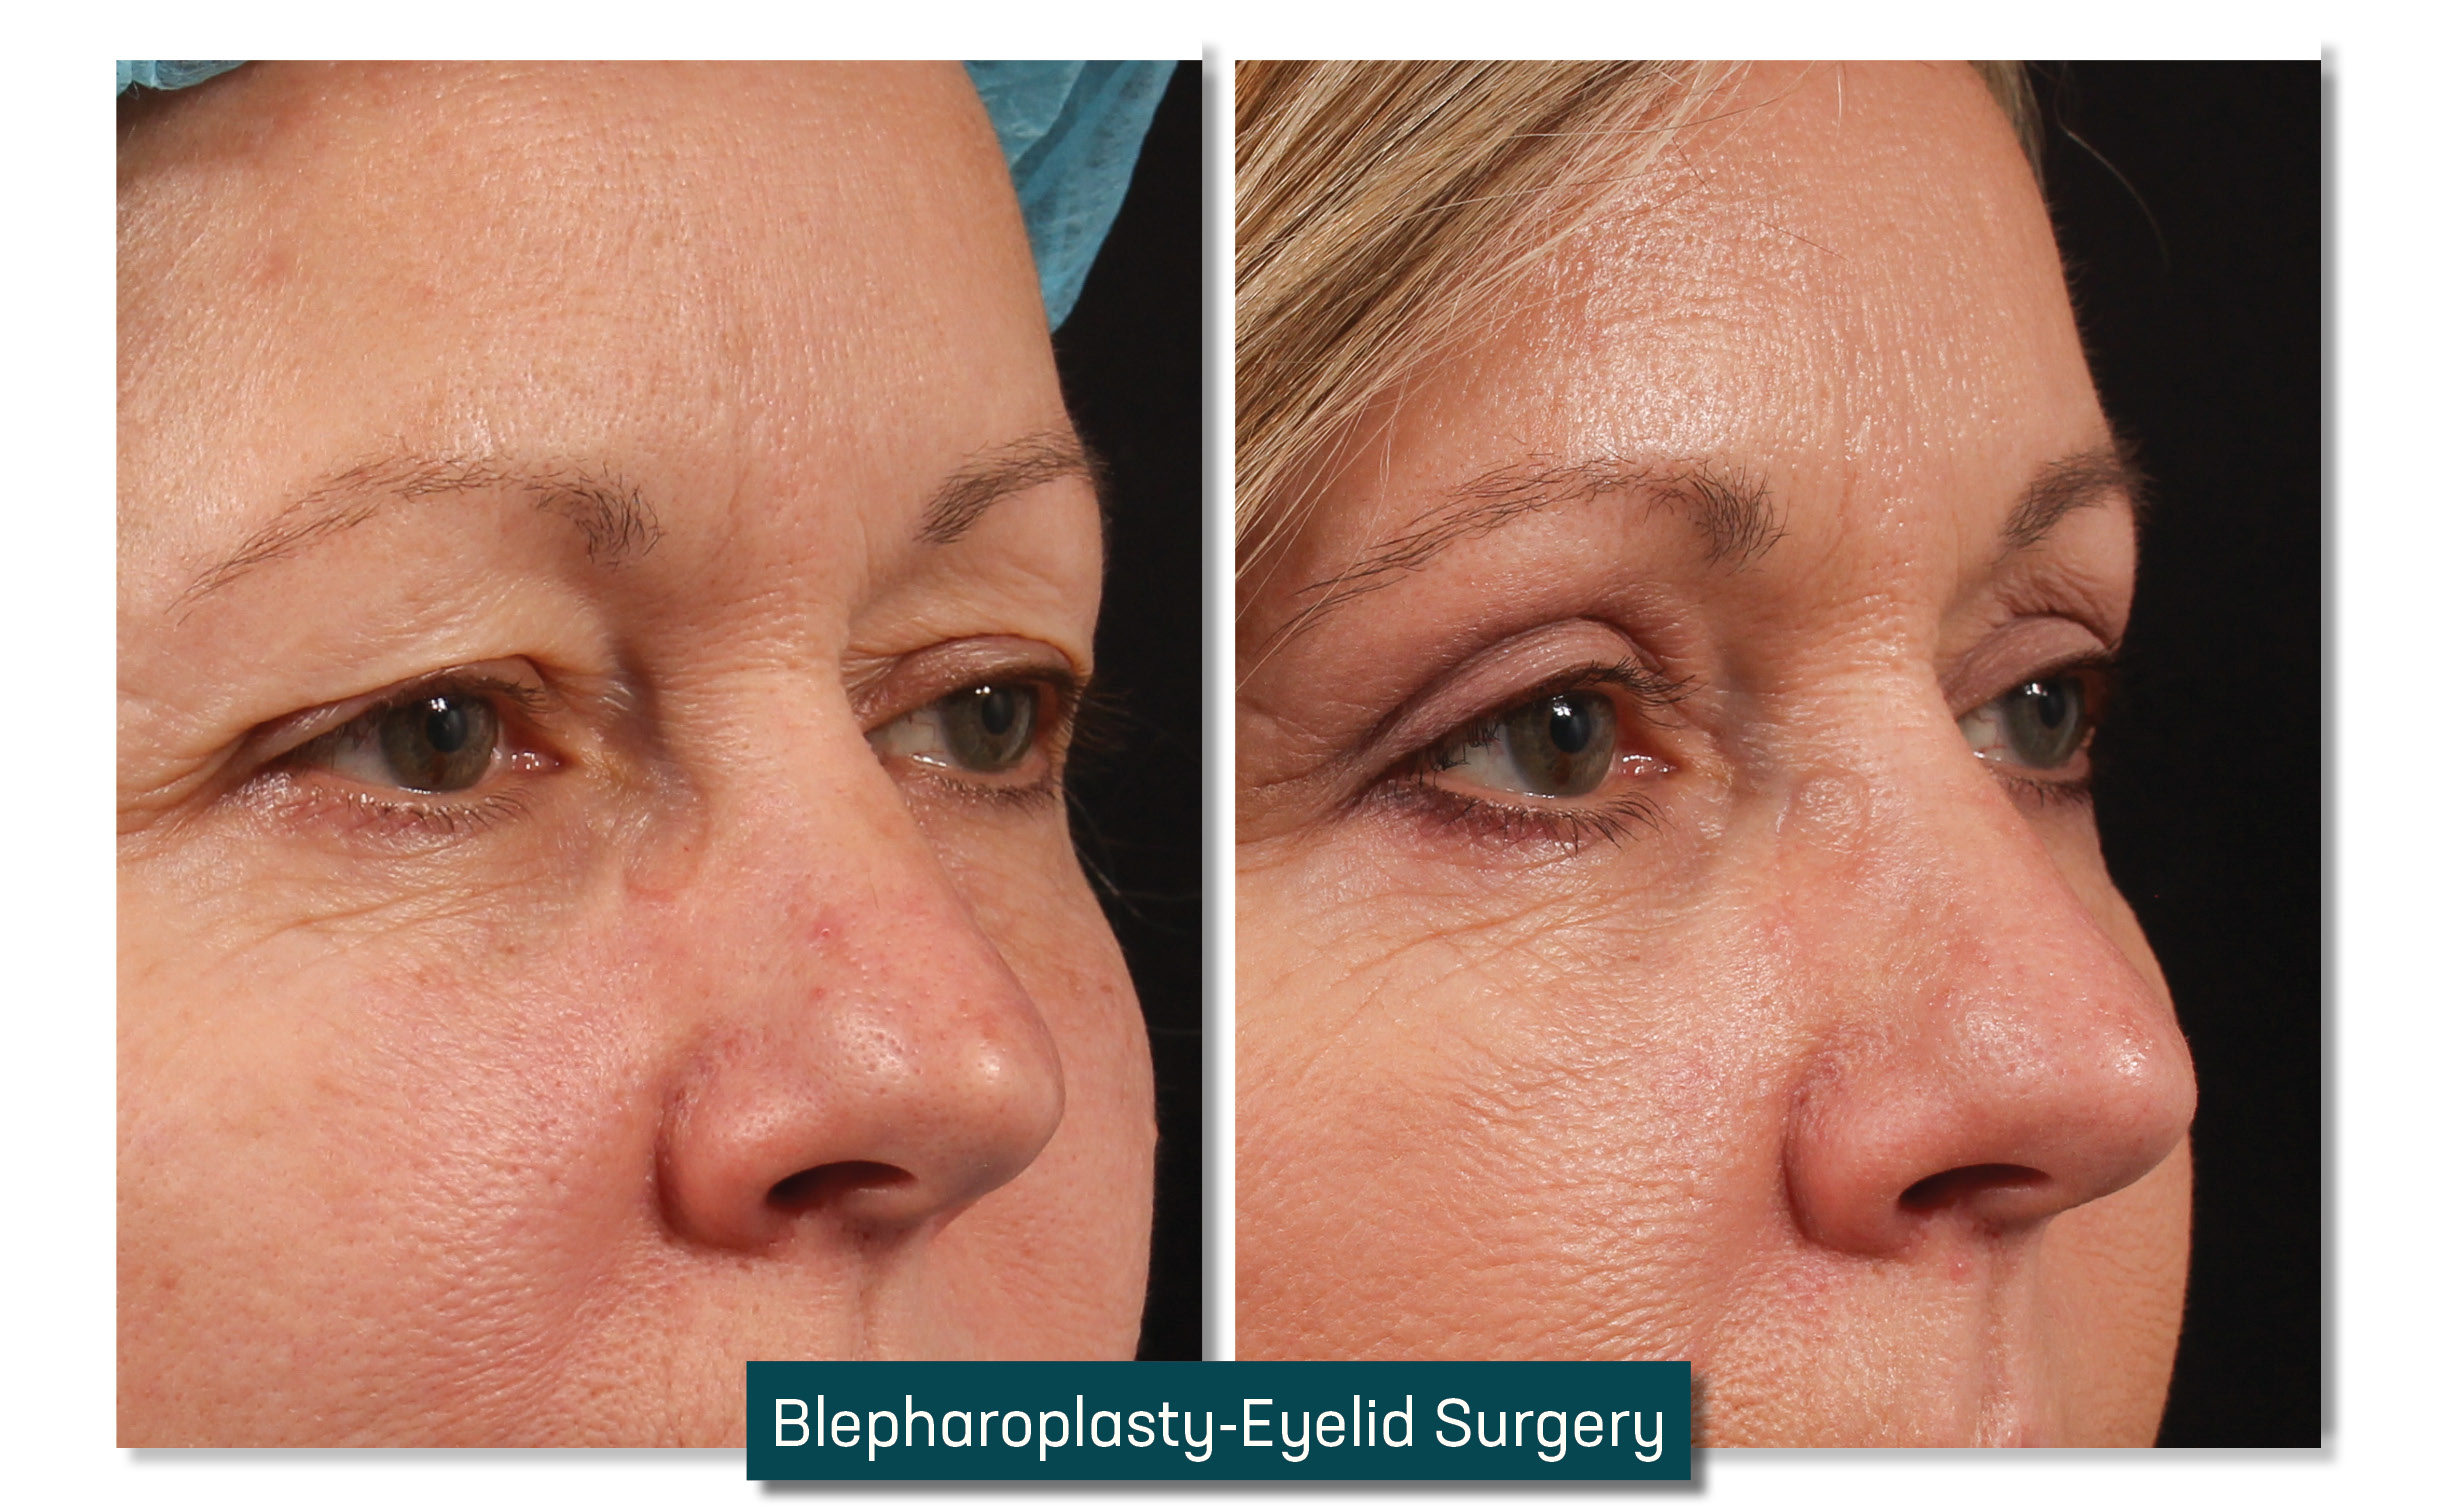 eyelid surgery - before and after